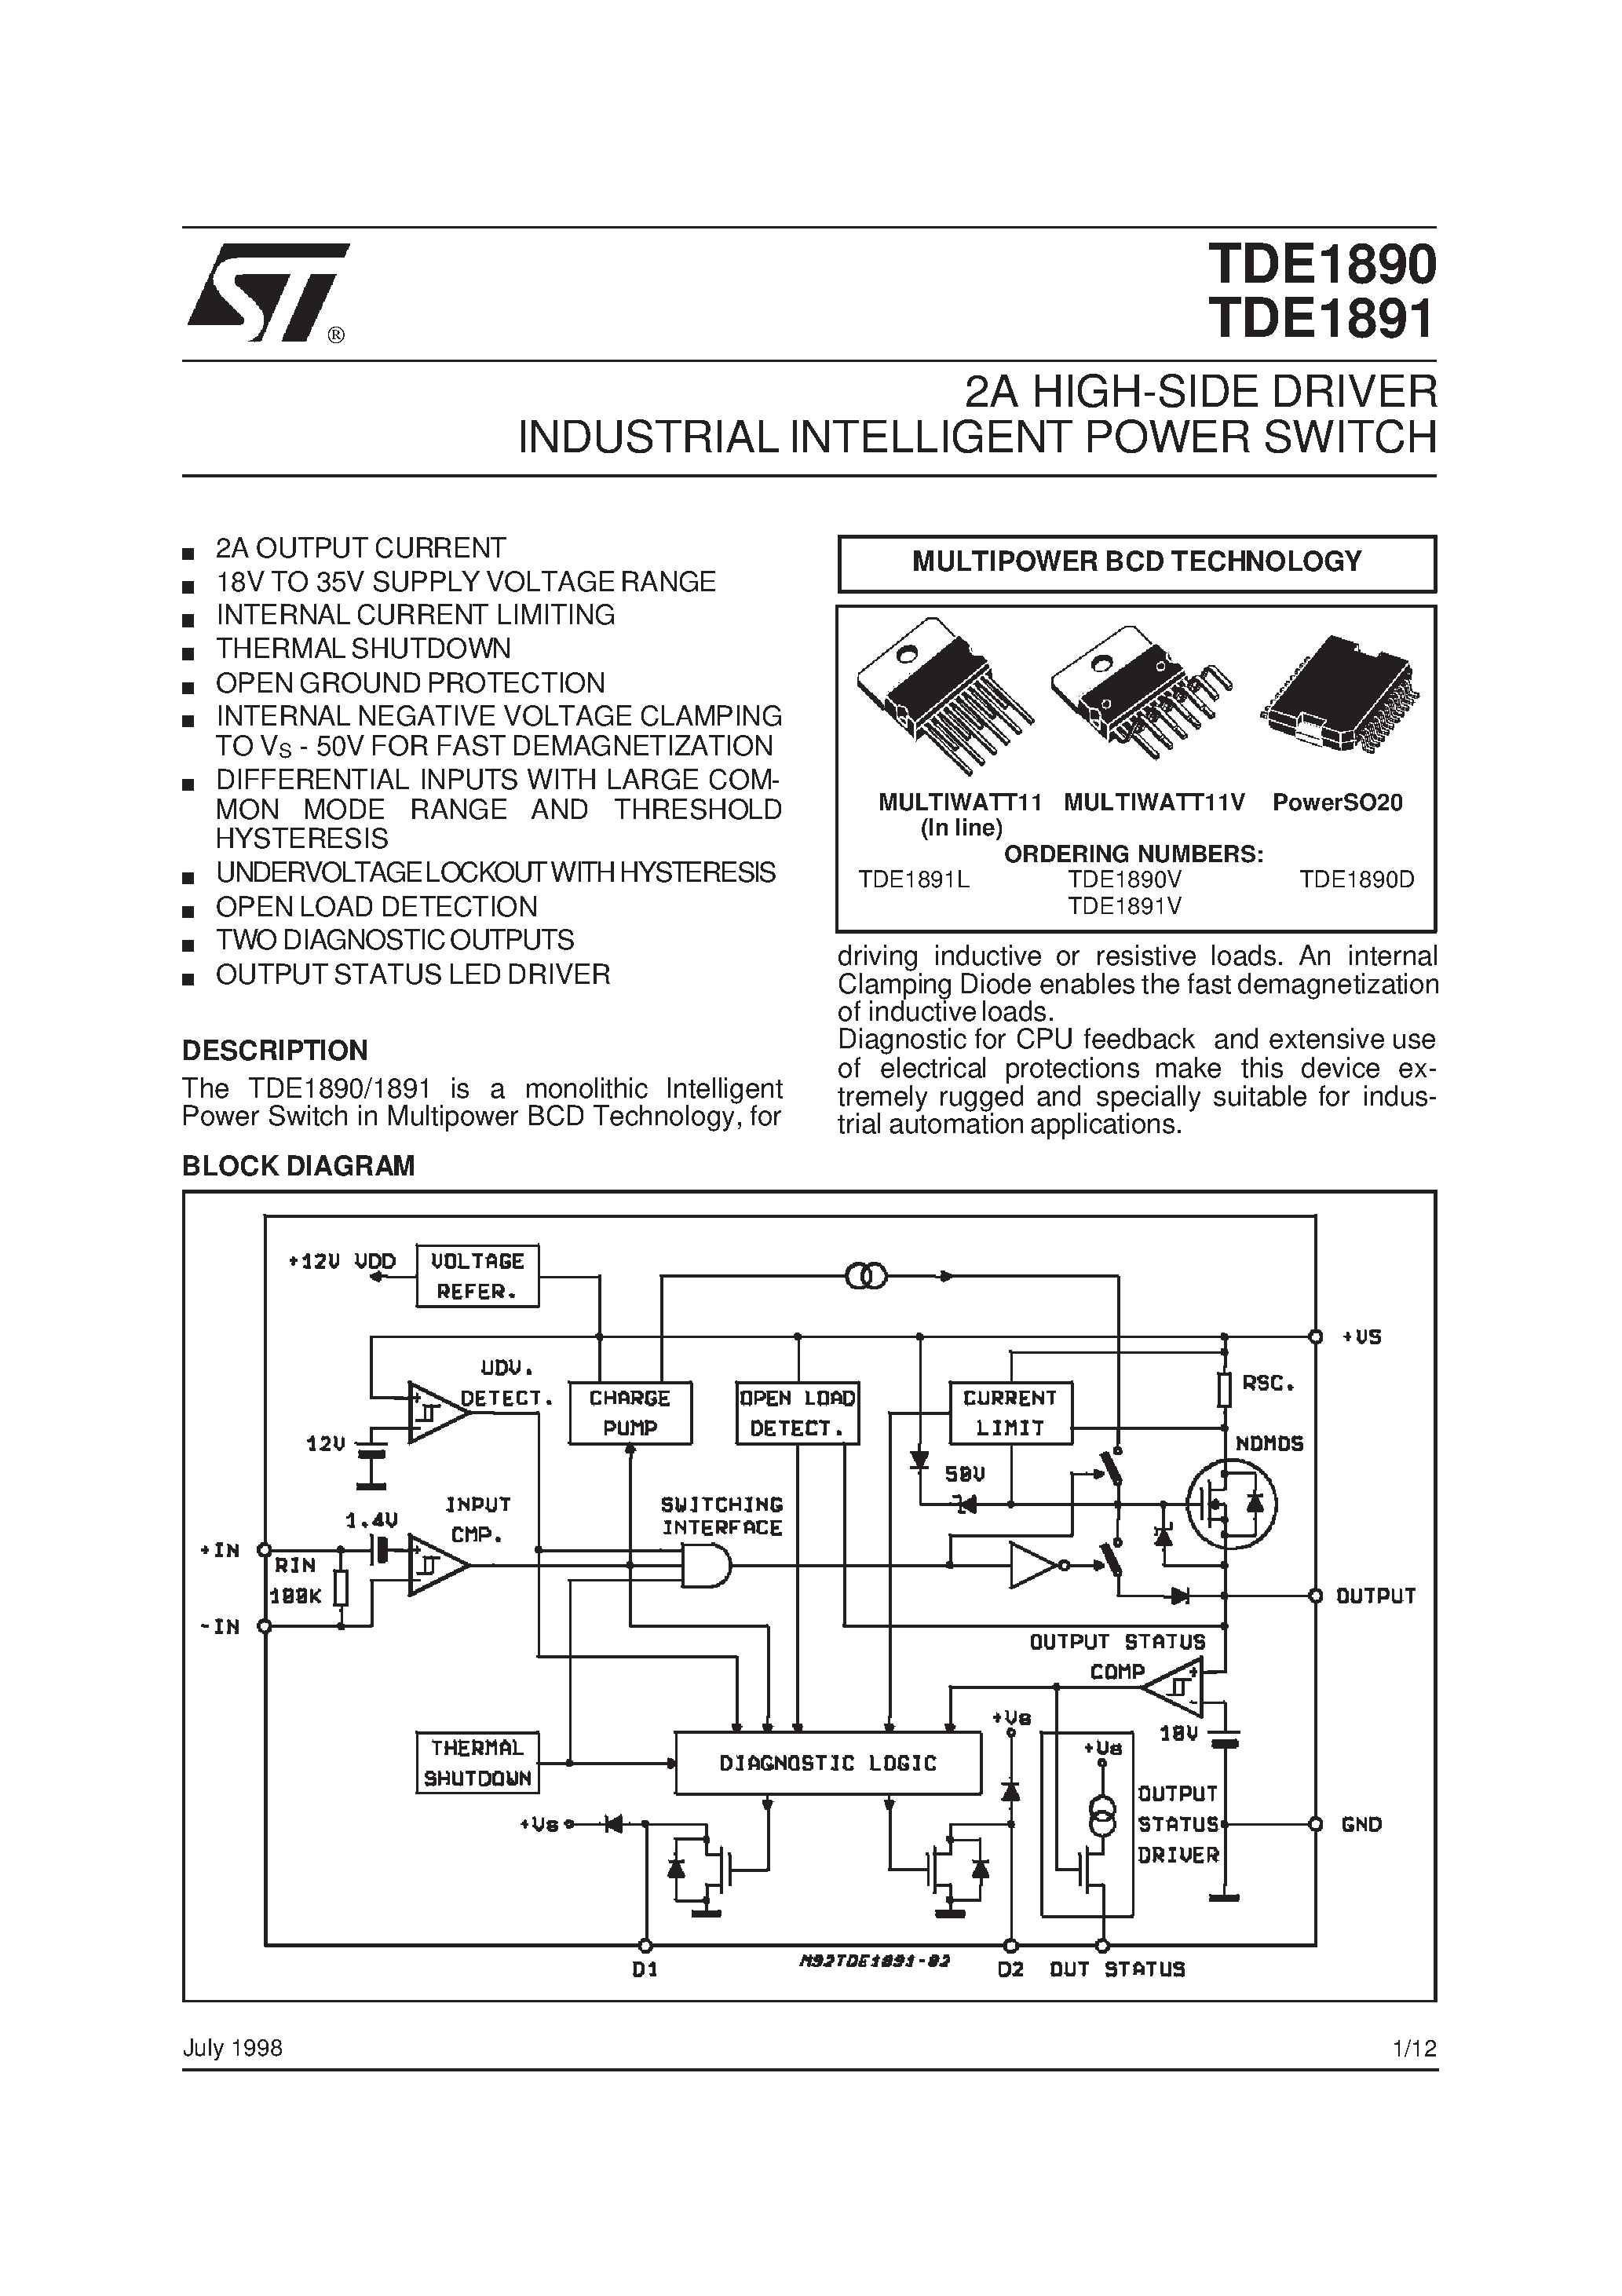 Datasheet TDE1890V - 2A HIGH-SIDE DRIVER INDUSTRIAL INTELLIGENT POWER SWITCH page 1